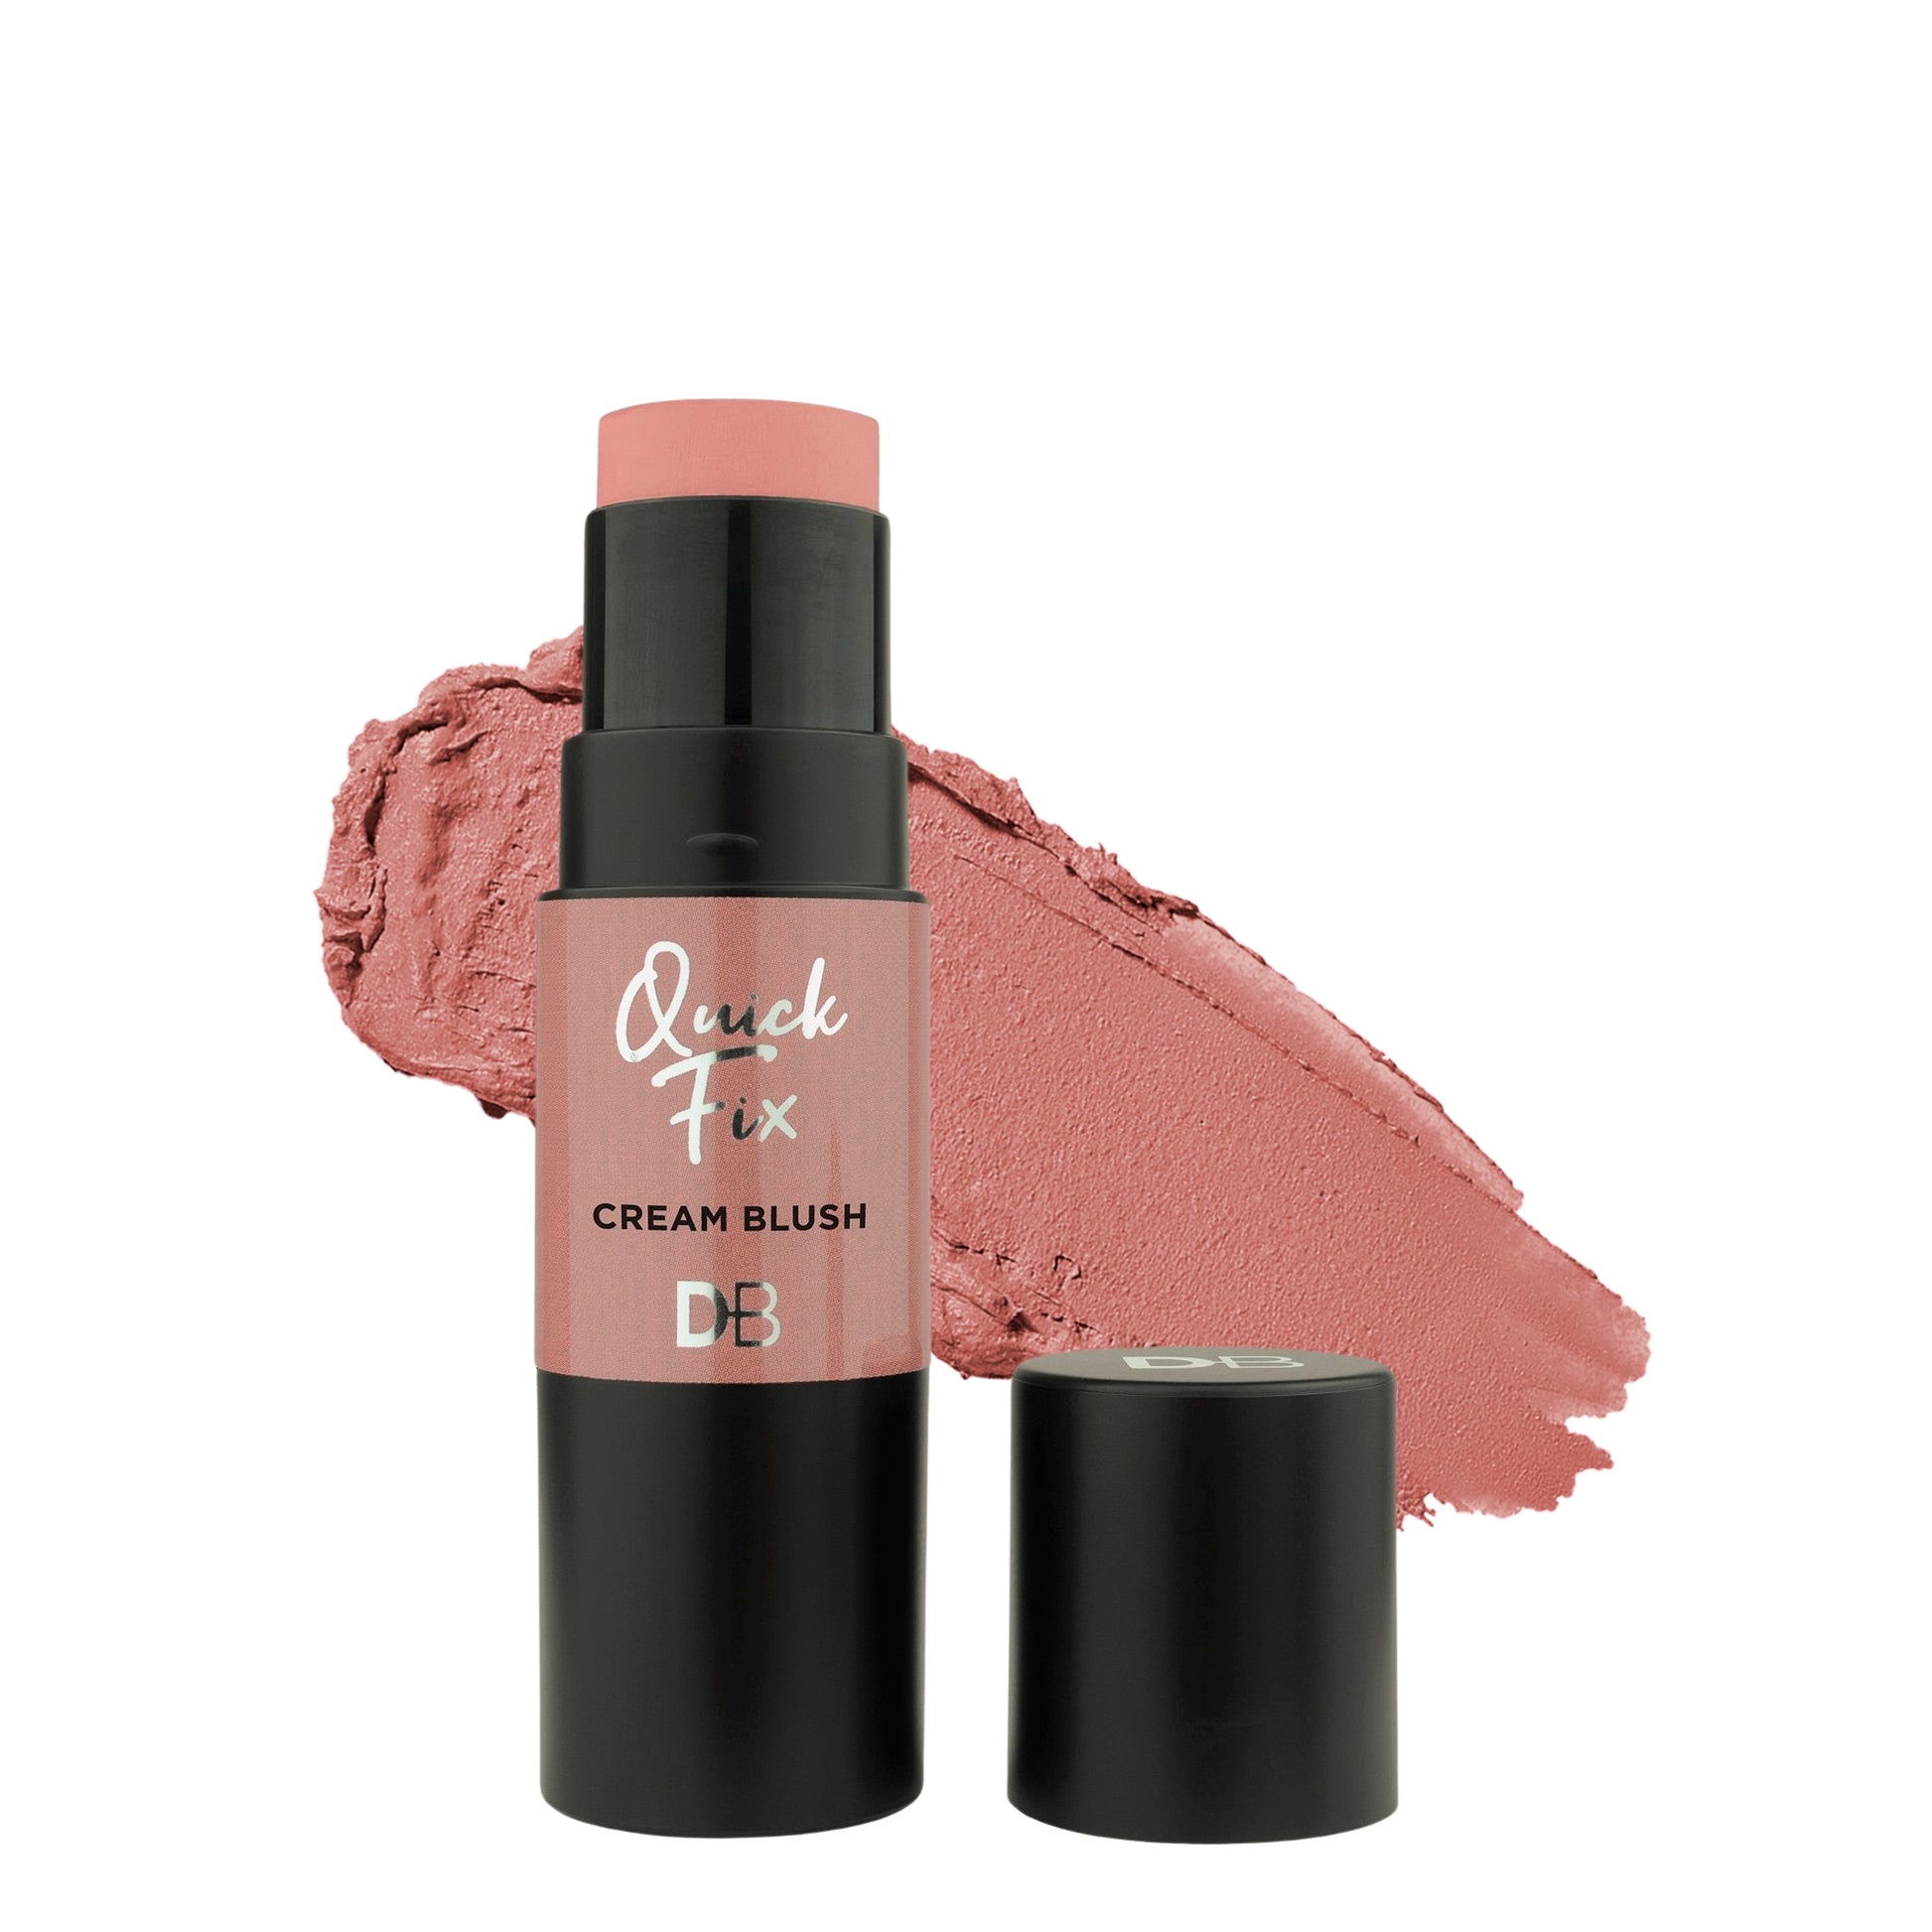 Quick Fix Cream Blush with Brush (Rosy) with swatch | DB Cosmetics